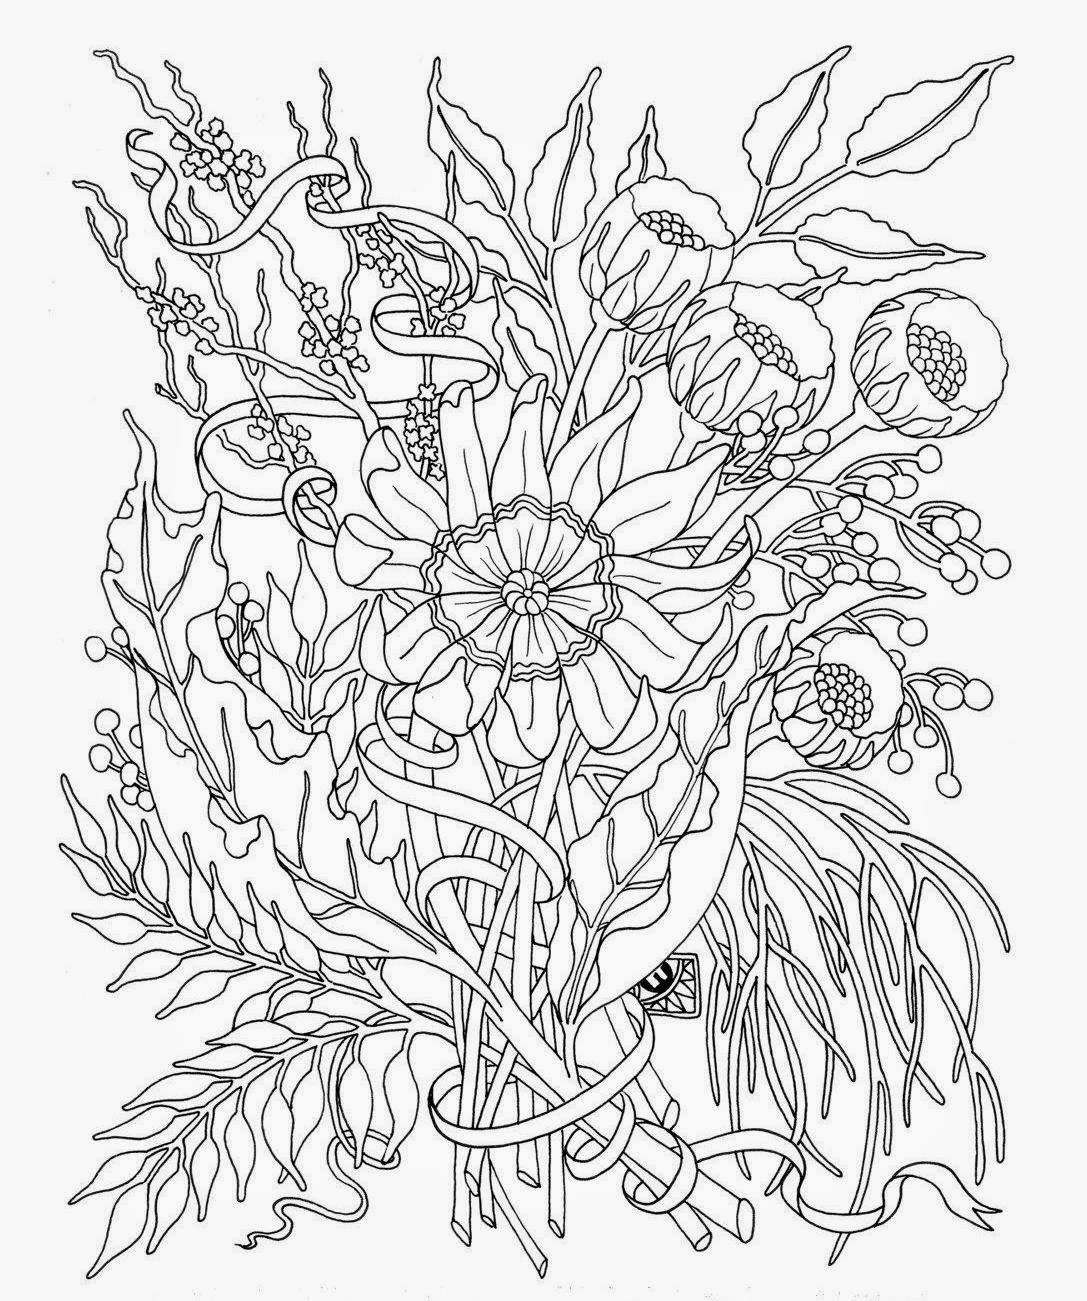 21 Recommended Types Of Vases for Flowers 2024 free download types of vases for flowers of cool vases flower vase coloring page pages flowers in a top i 0d inside awesome coloring pages flowers for teens paper crafts pinterest of cool vases flower vas